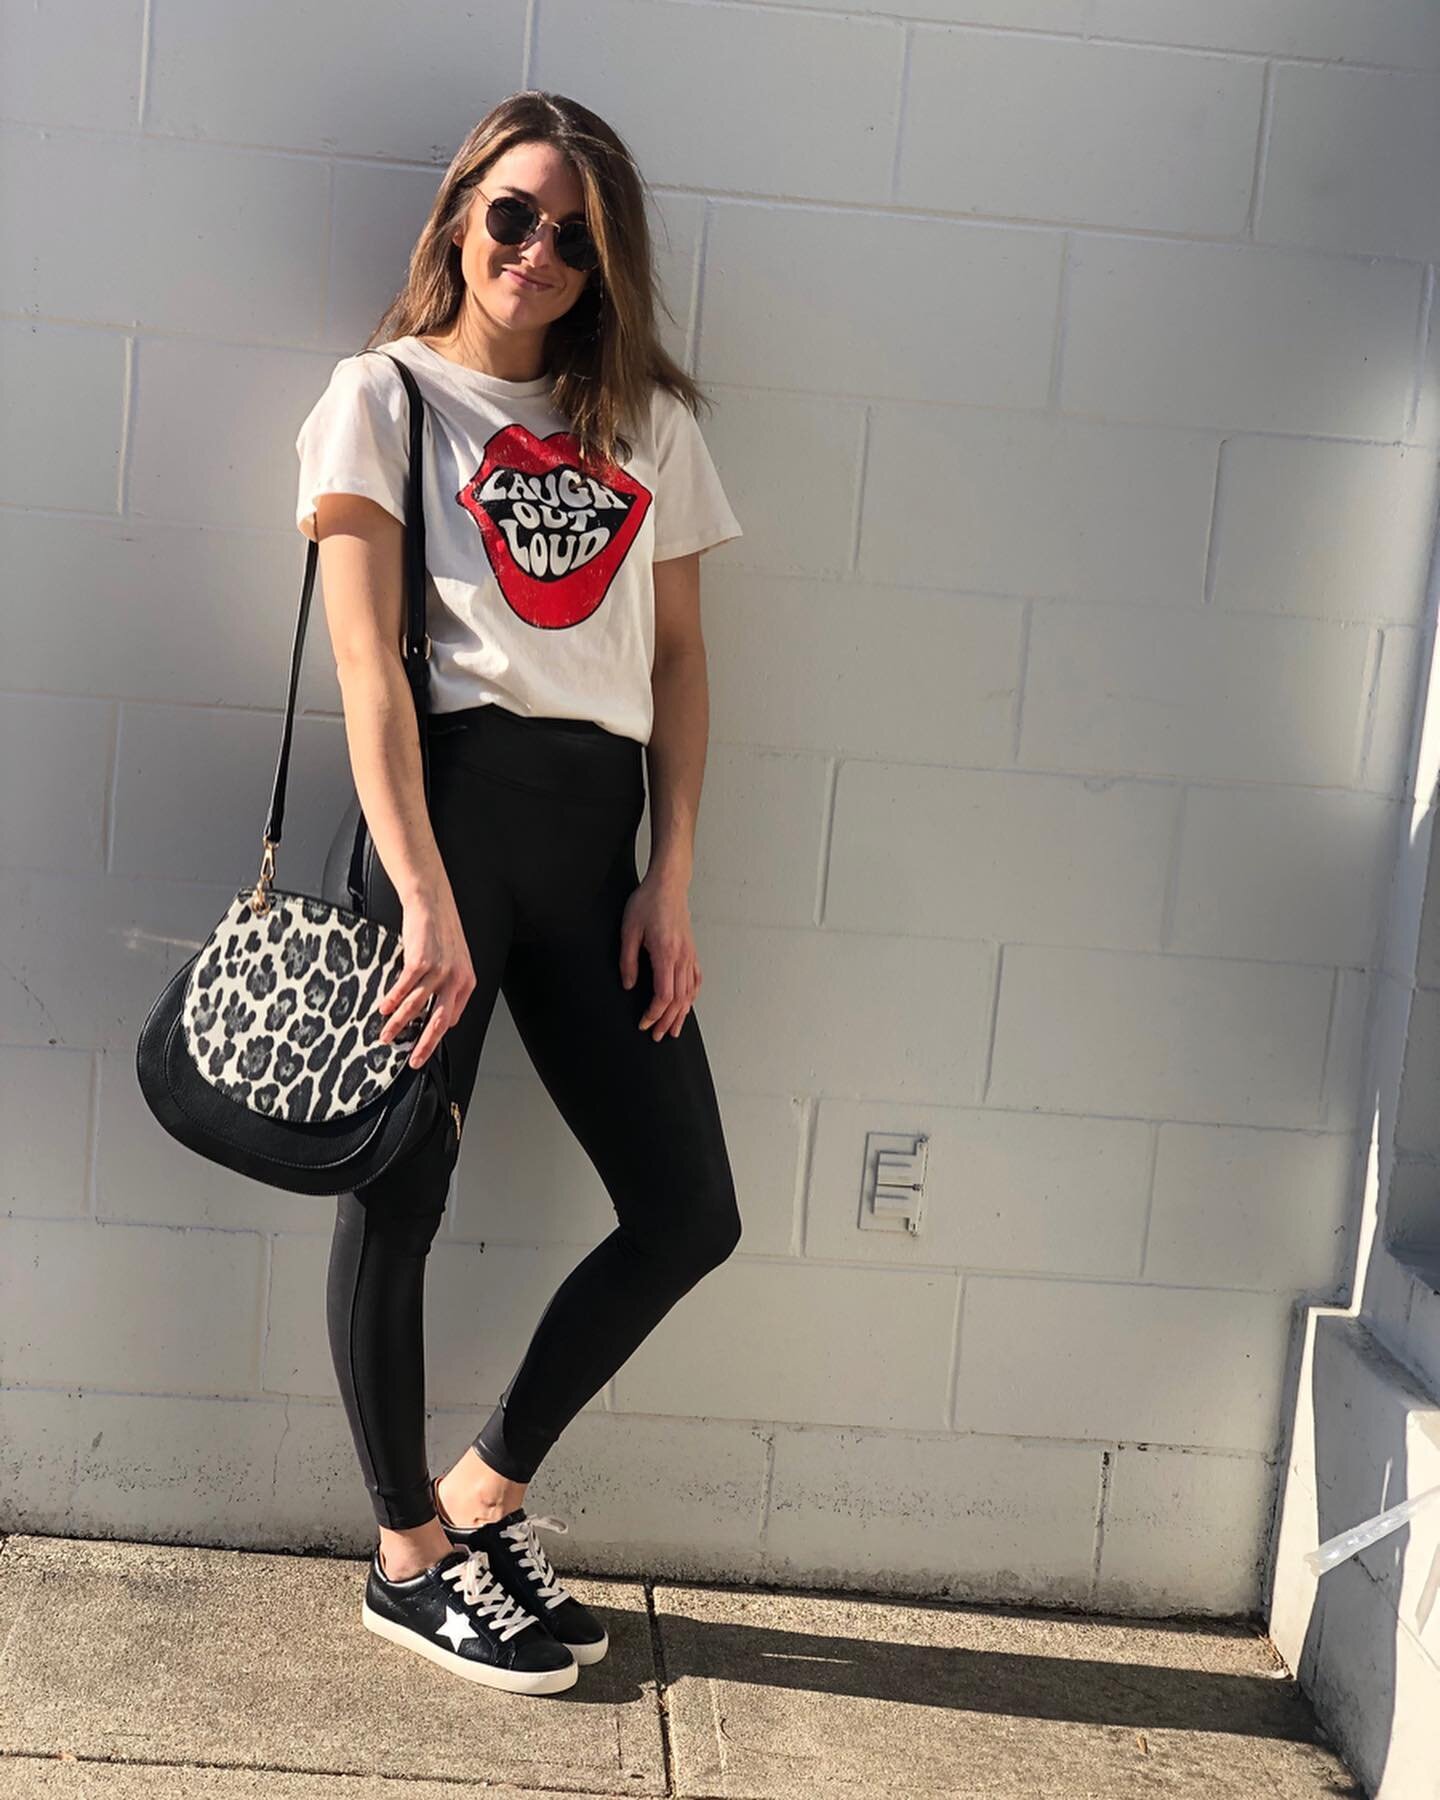 Happy sunshine day!!! A few styles for this great Monday...laugh out loud tee with the cutest animal print purse, fun bubble gum pink top, and lastly tie dye hooded sweatshirt like top...and ohhh how about those sneakers 👟#zinniasboutique #wewillshi